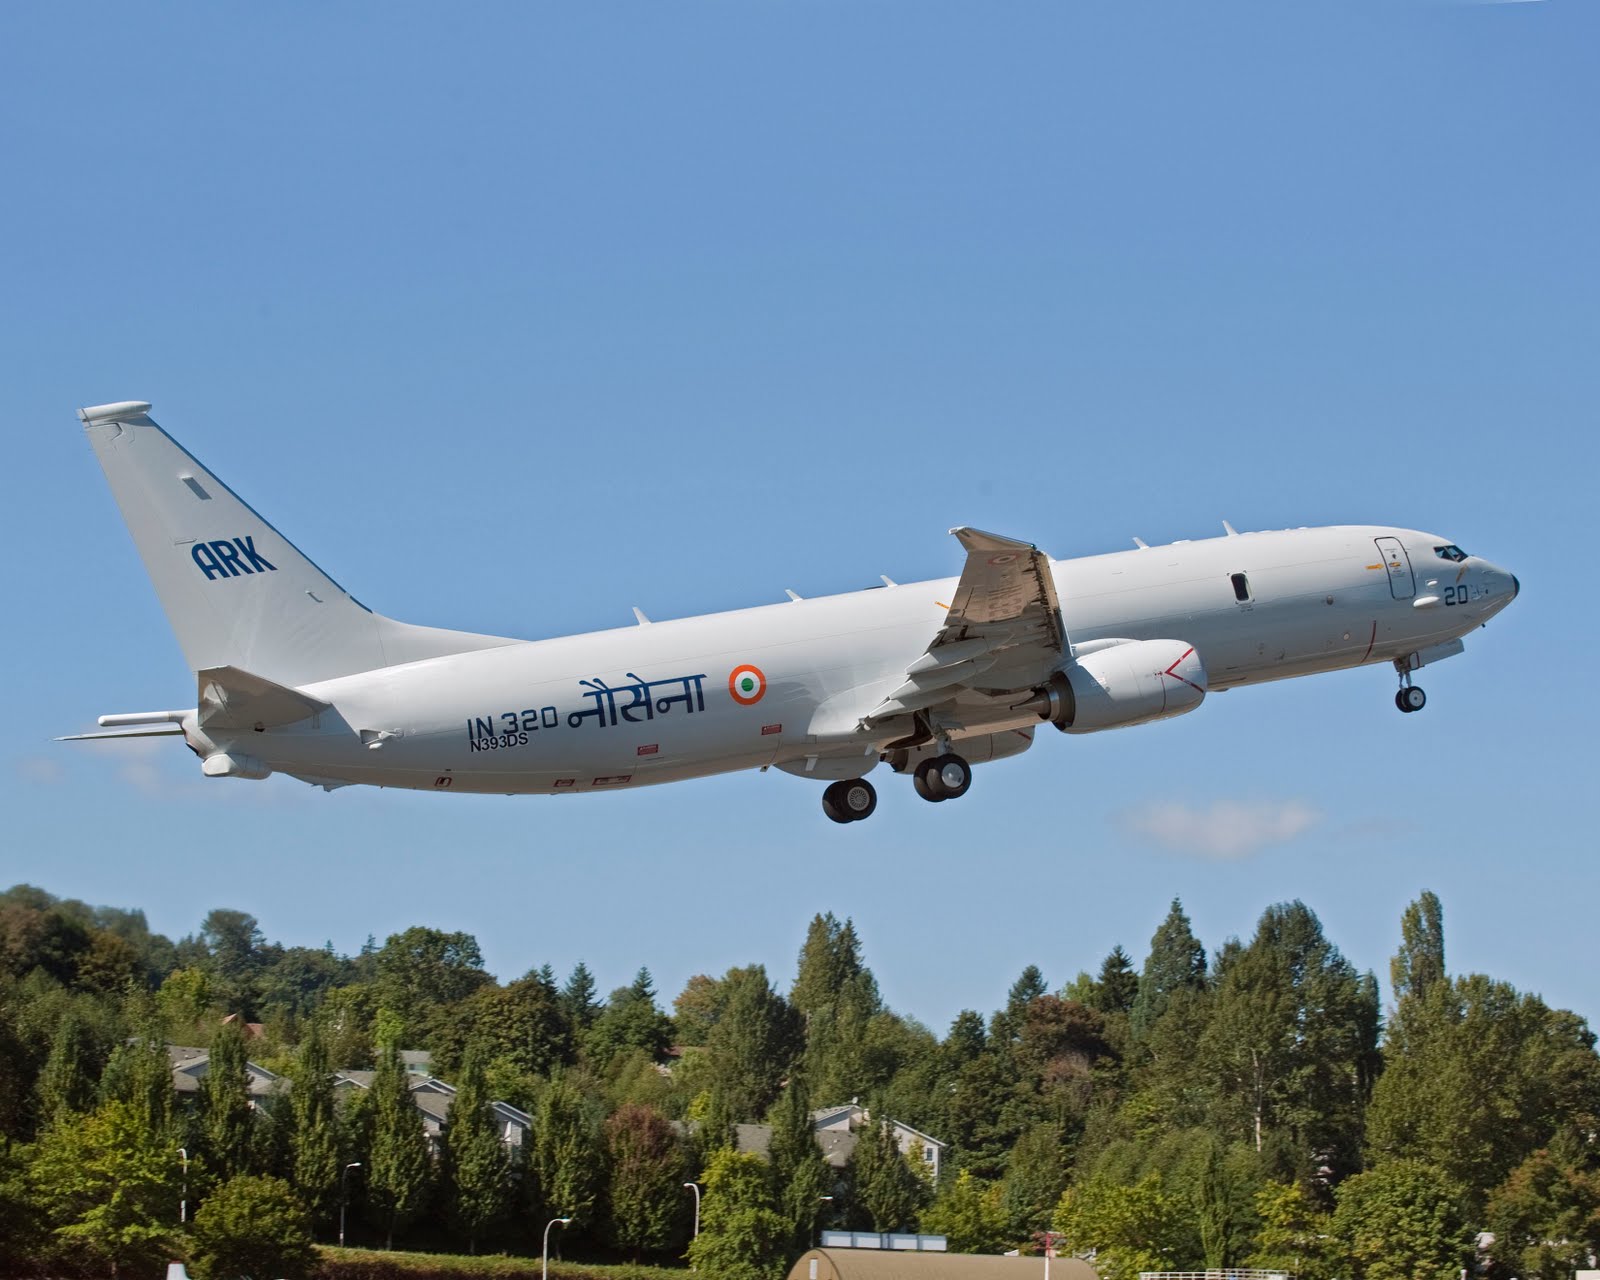 Boeing's first P-8I aircraft for the Indian Navy began its official flight test program July 7, taking off from Boeing Field in Seattle at 9:15 a.m. and landing three hours and 49 minutes later after demonstrating flying qualities and handling characteristics. The flight went as planned with all test objectives met.